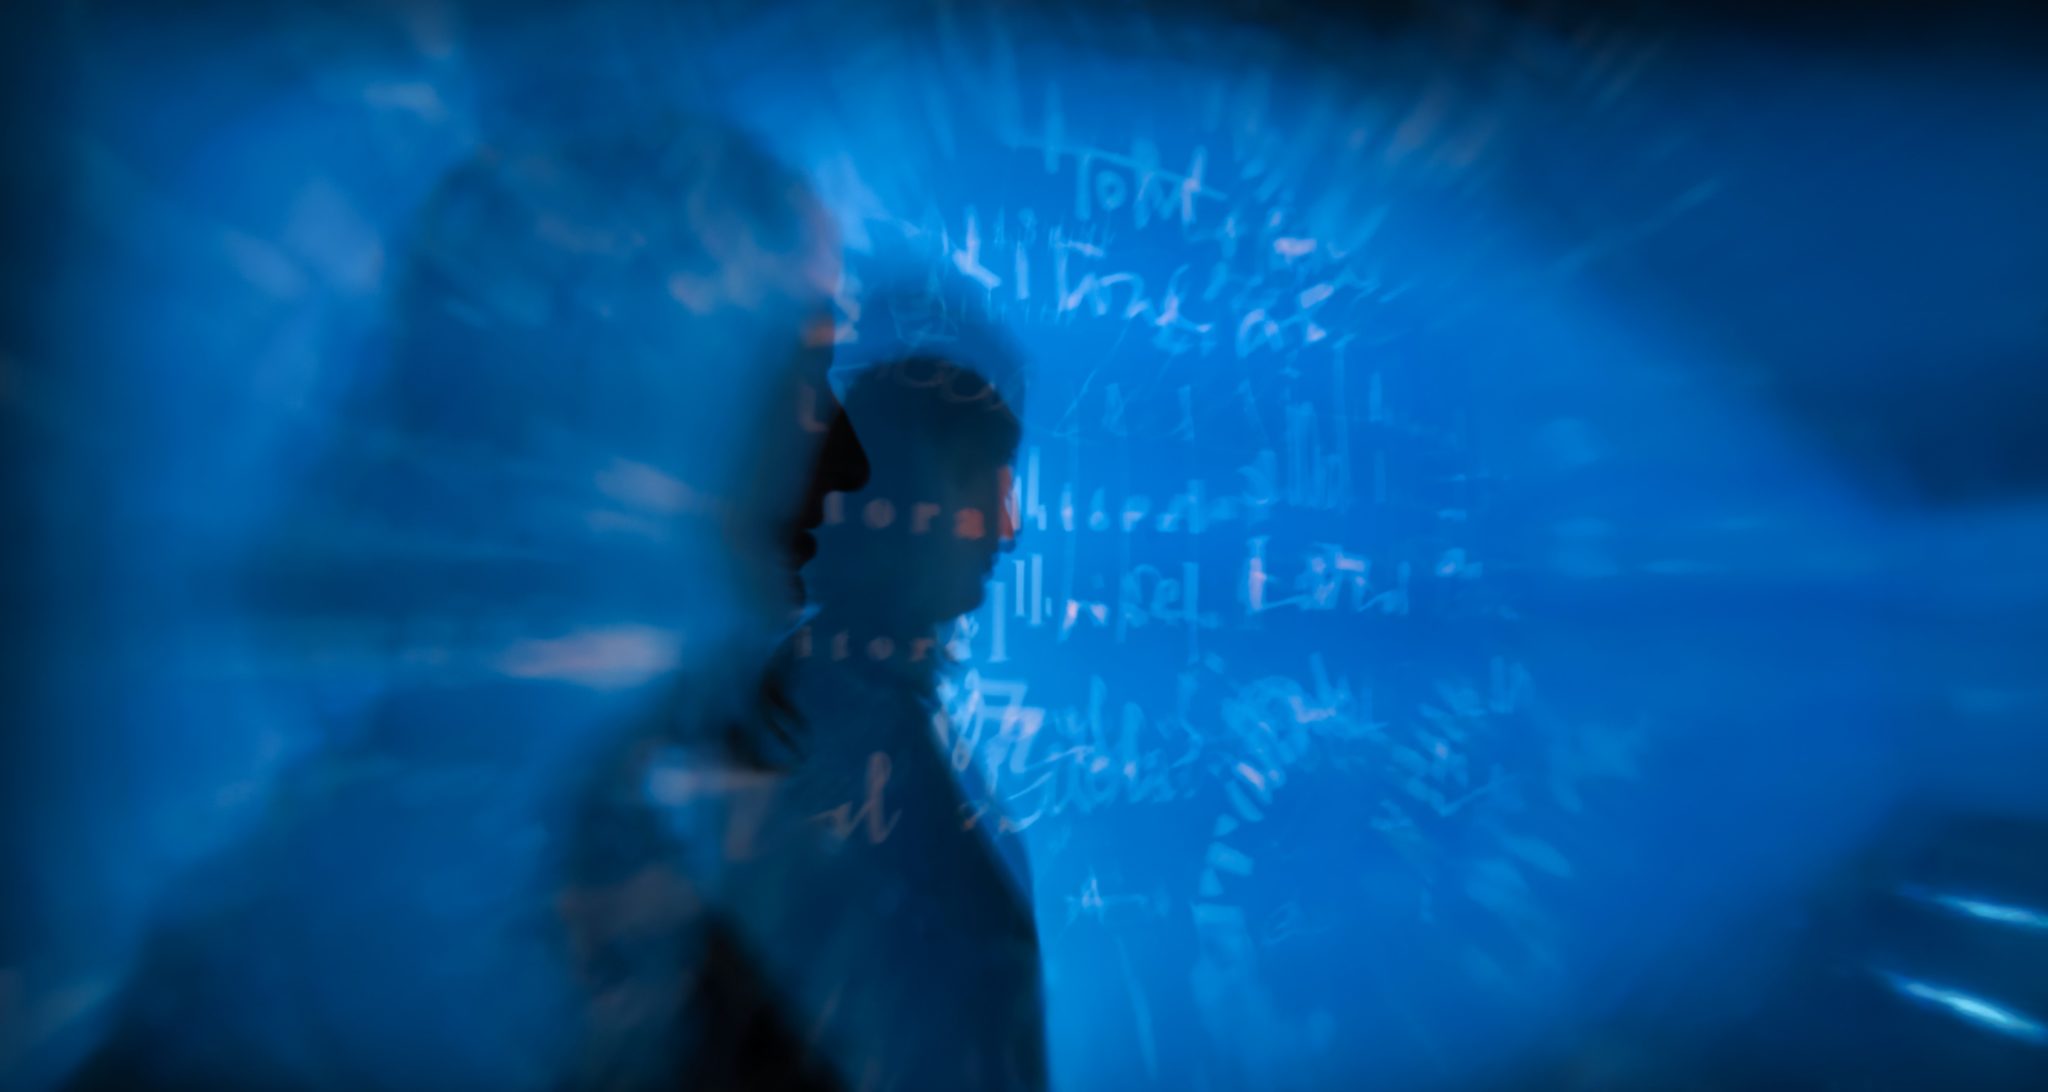 blurry blue silhouette of a person with abstract writing in the background